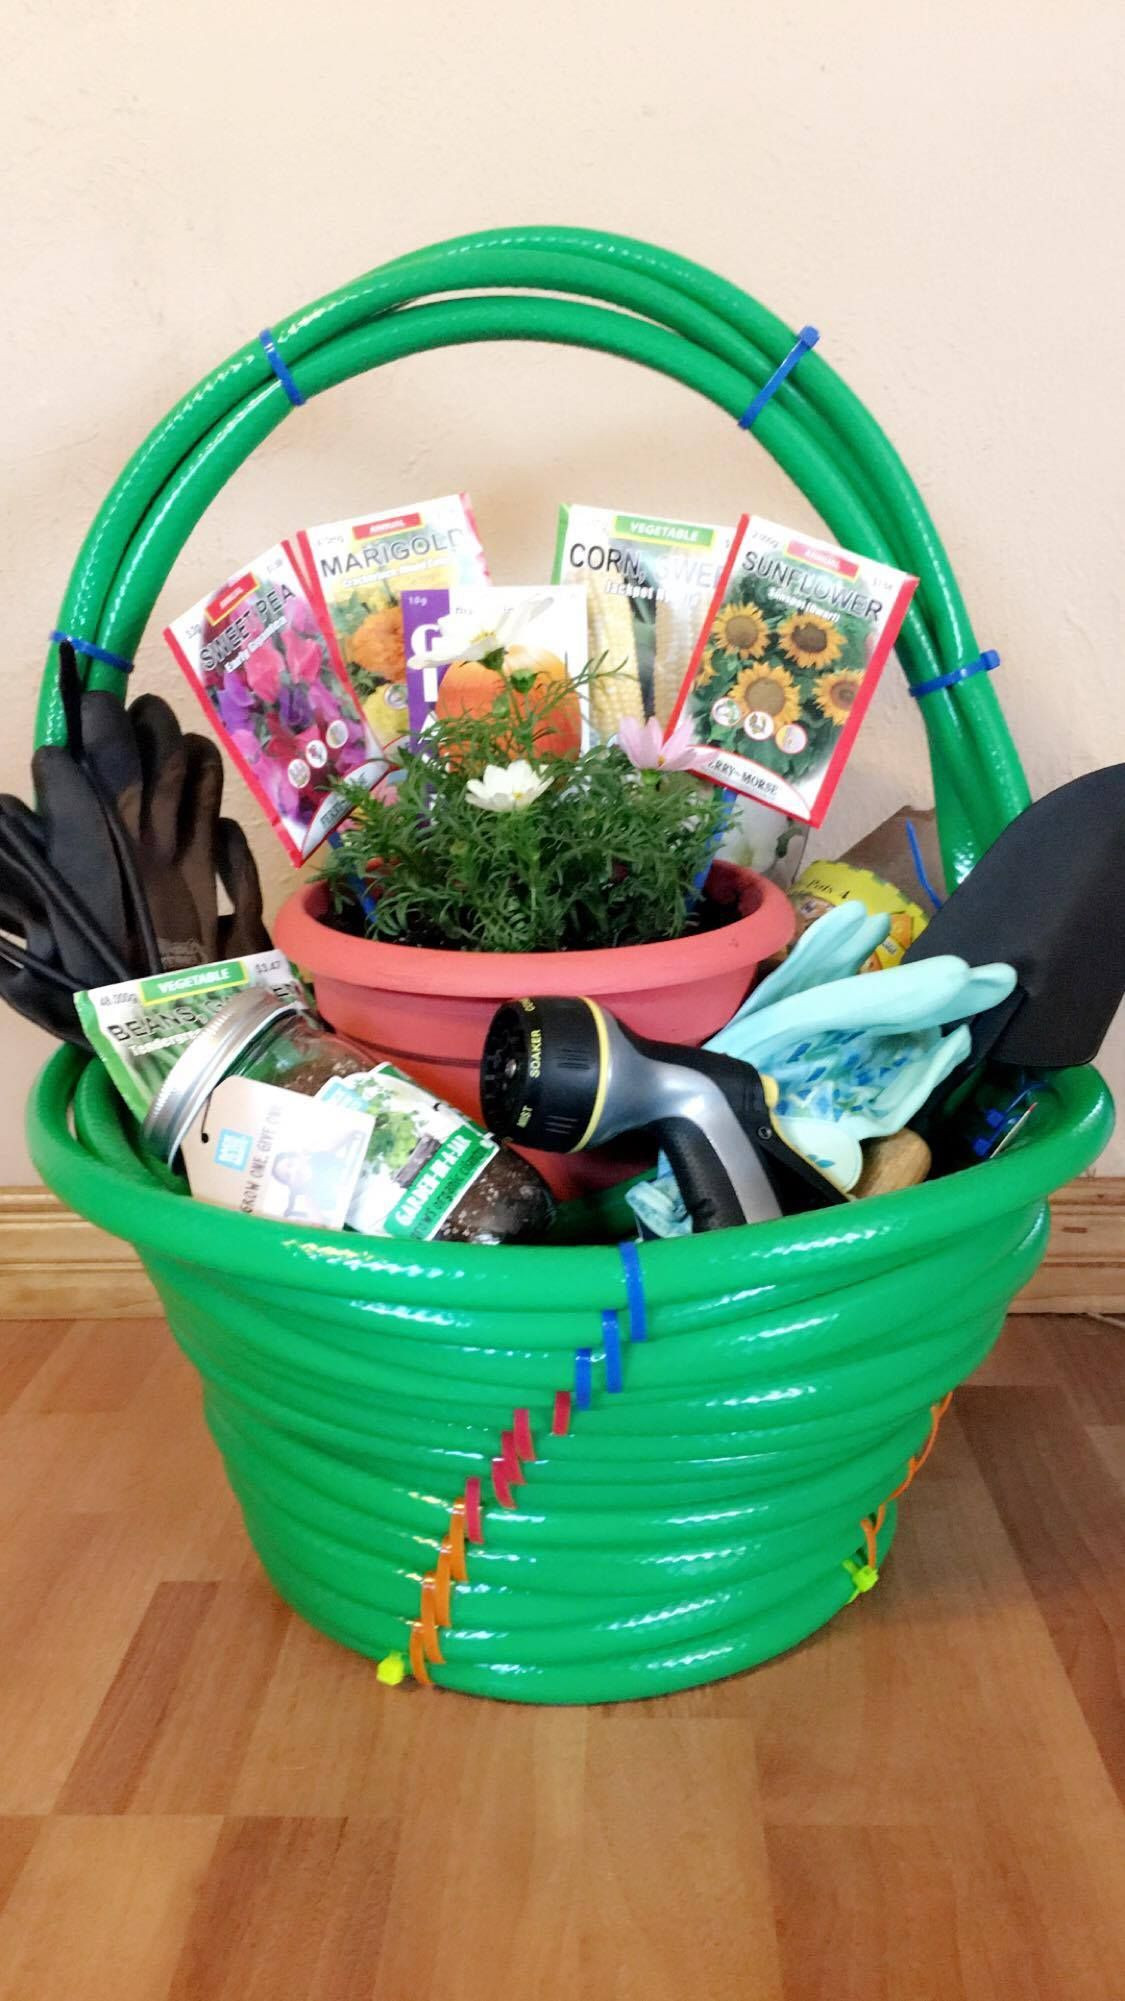 Themed Gift Basket Ideas For Auctions
 Garden themed silent auction basket